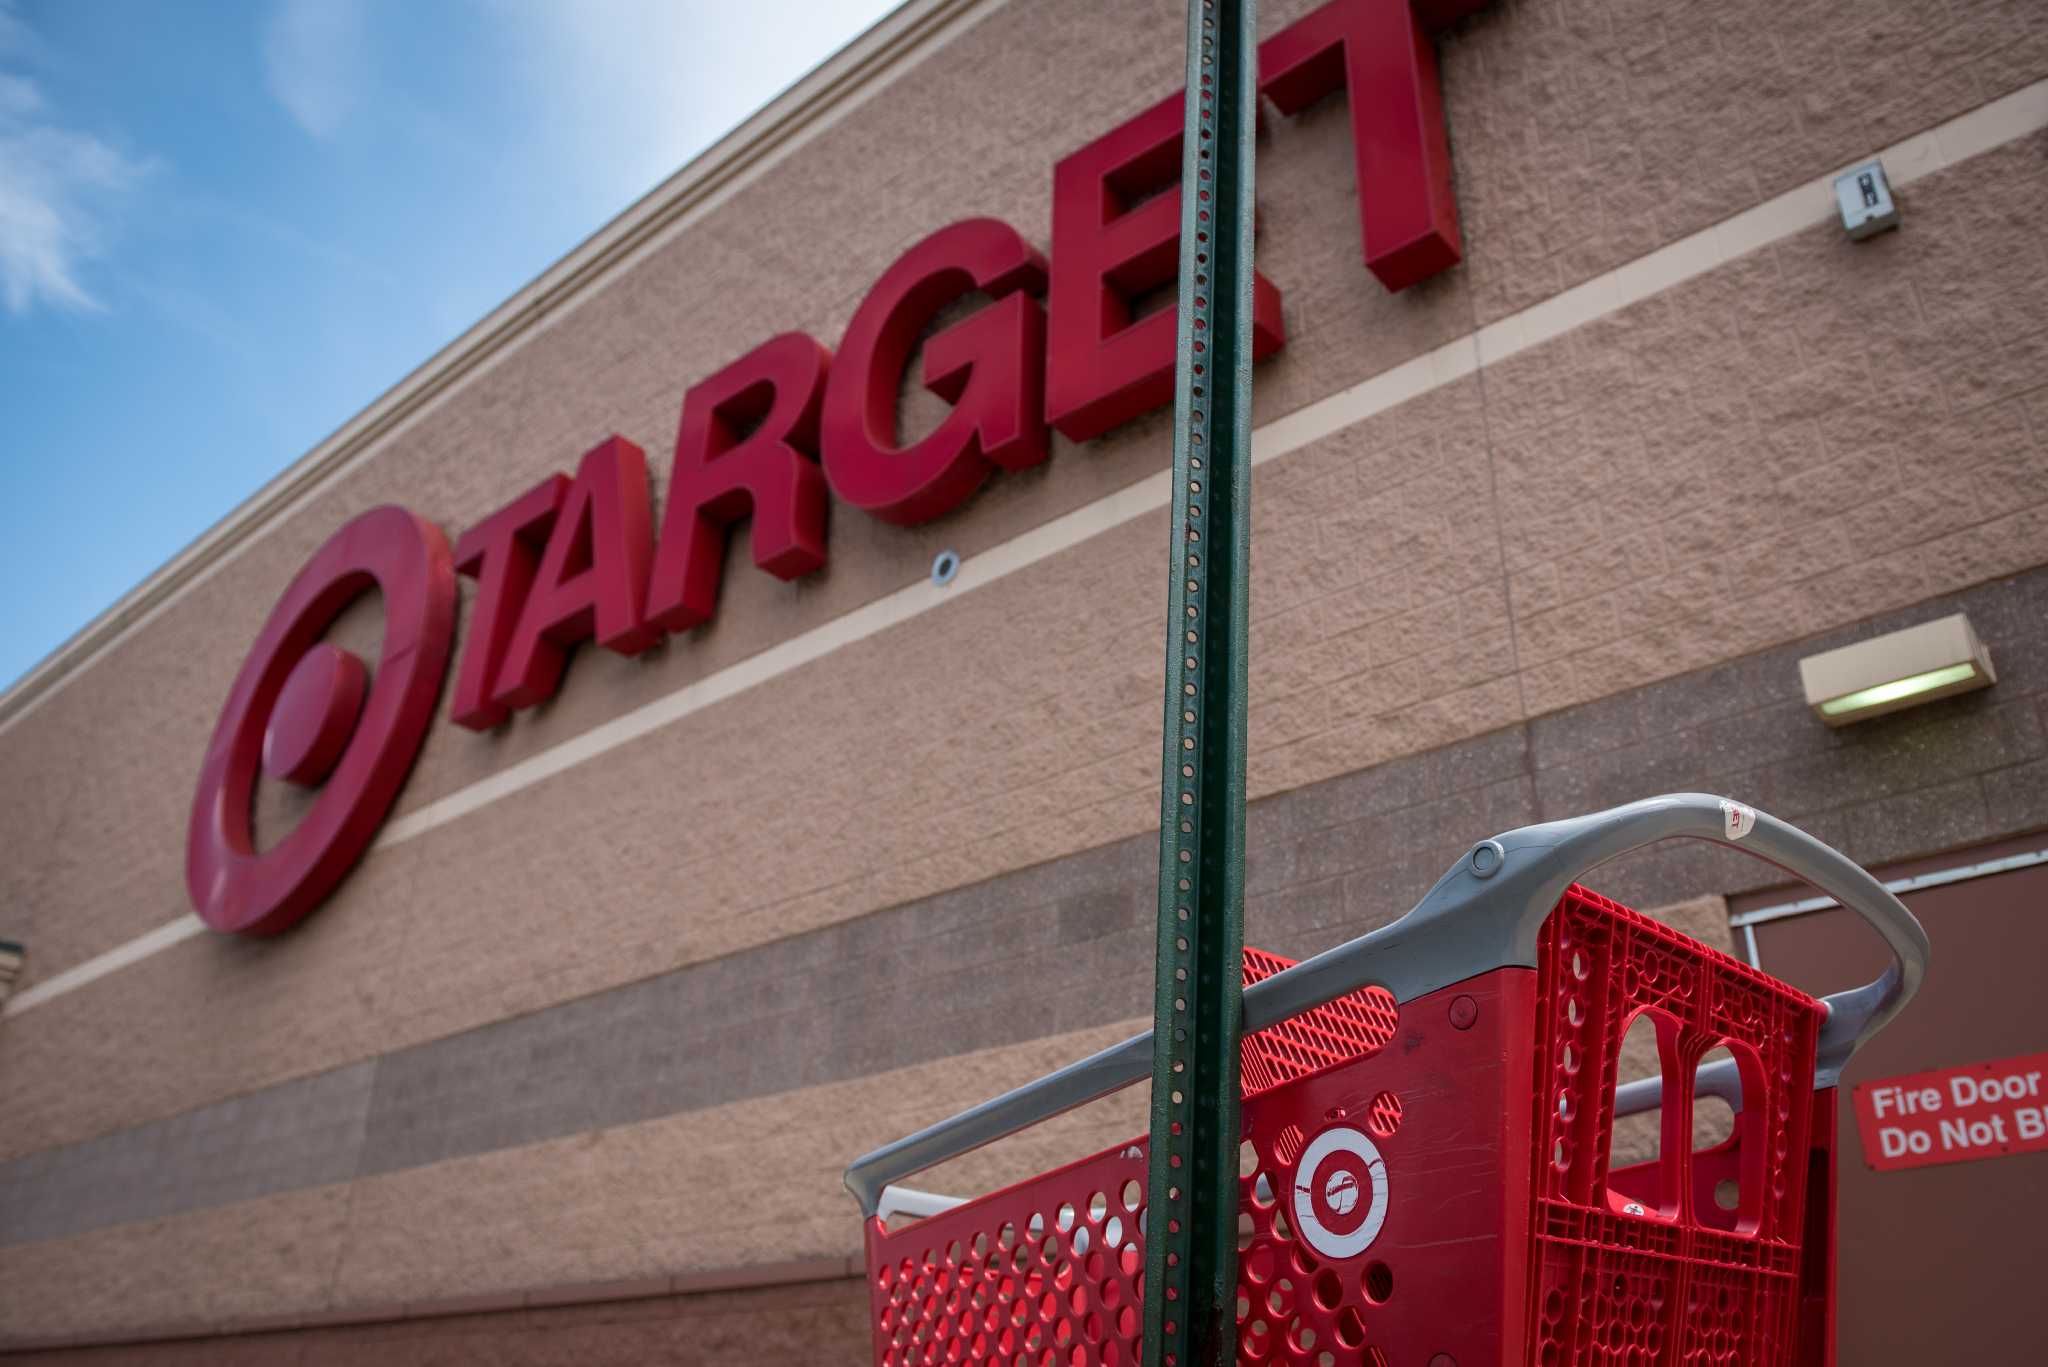 Target permanently closed its store in Northwest San Antonio after hail